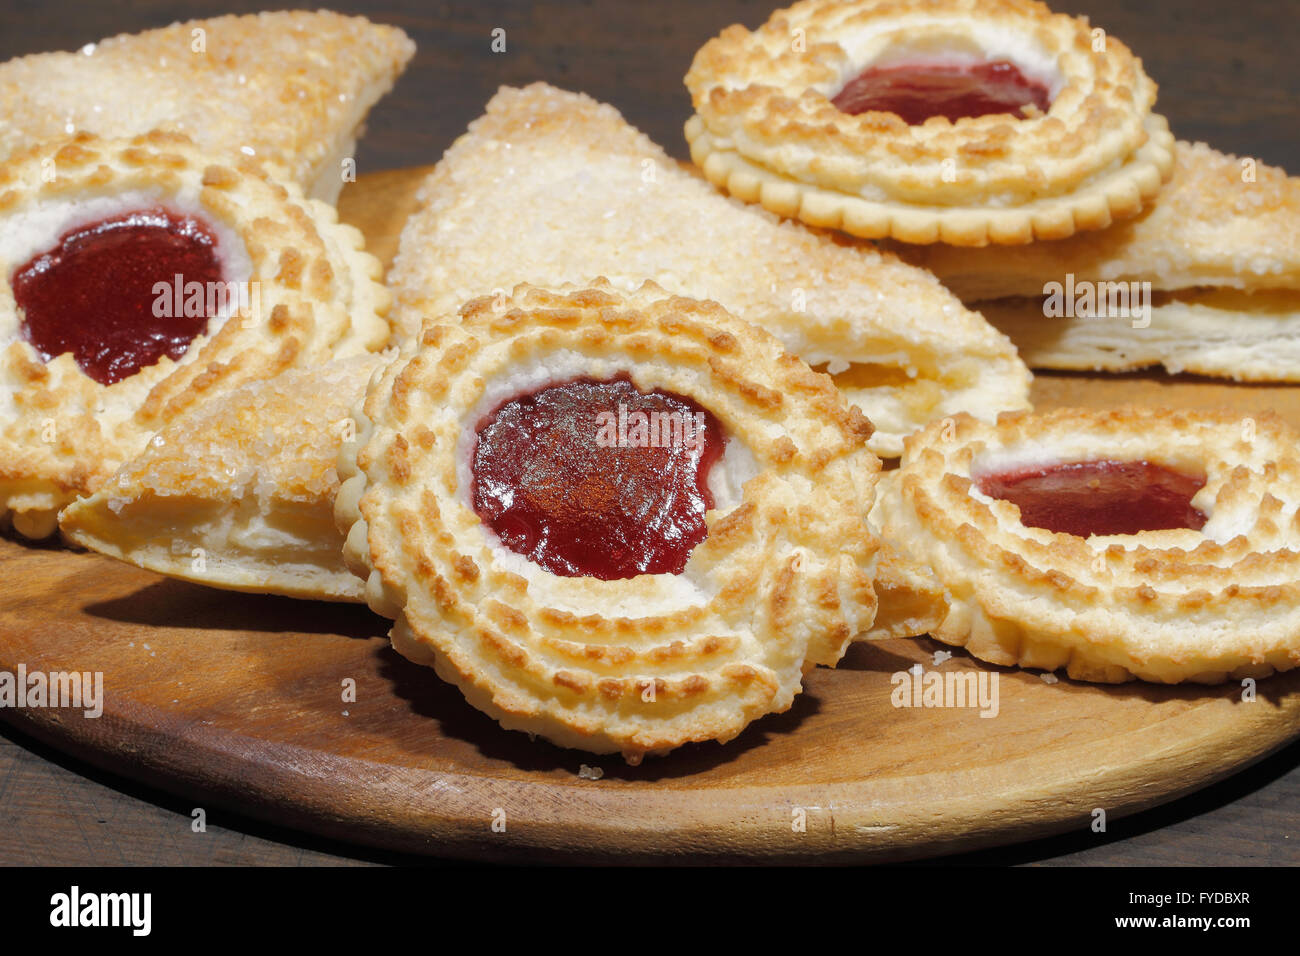 With apple stuffed dumplings and coconut tartlets on a rustic, wooden surface Stock Photo